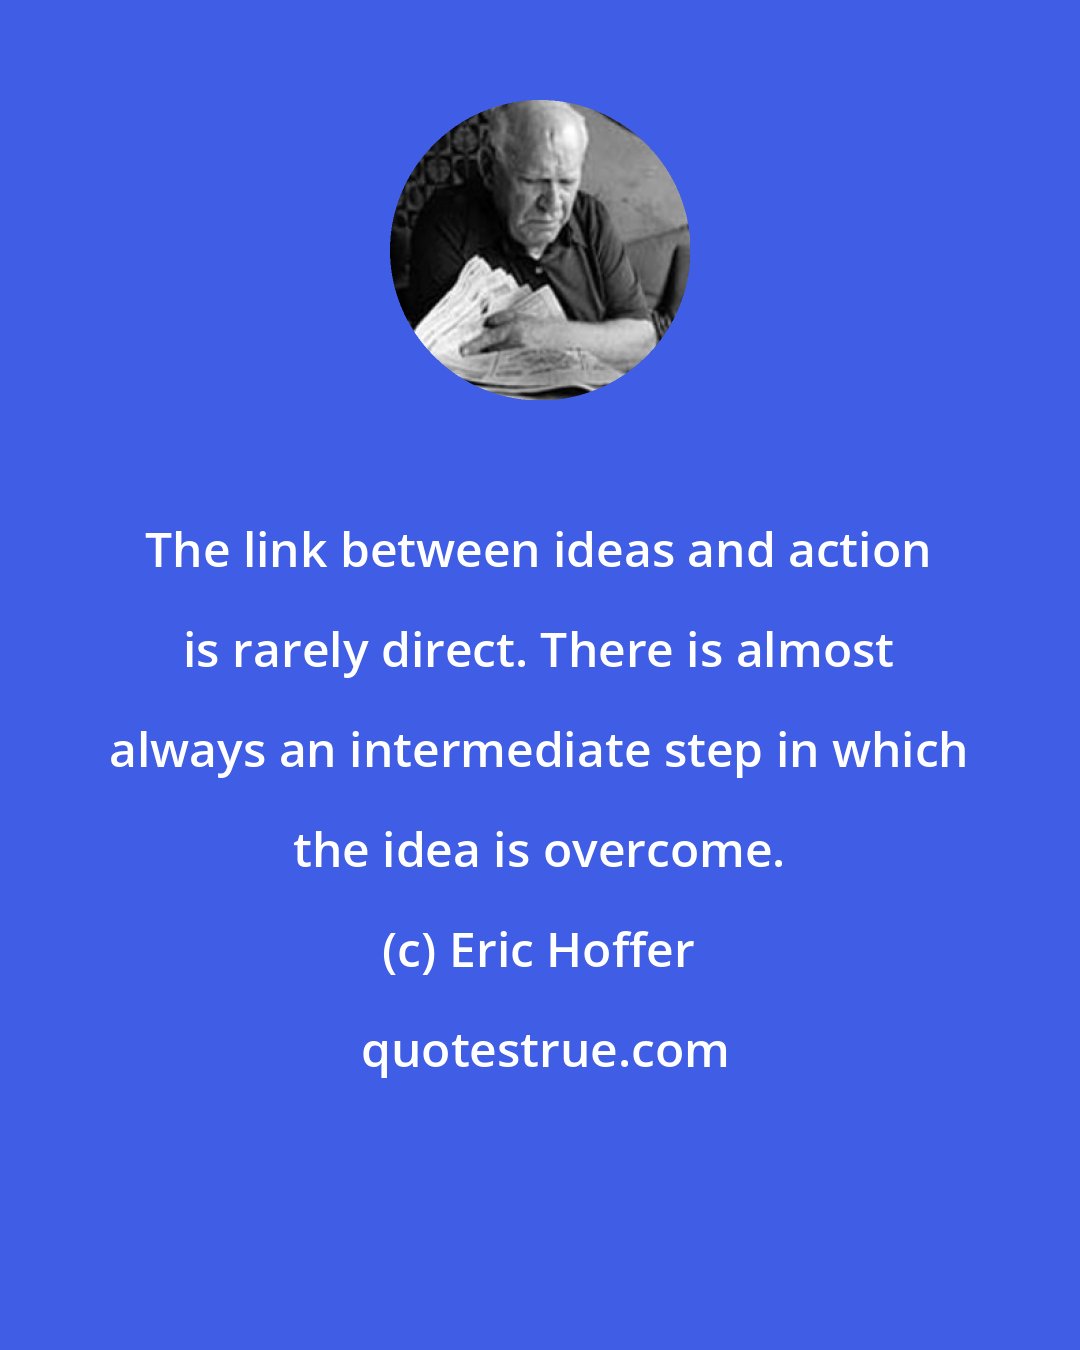 Eric Hoffer: The link between ideas and action is rarely direct. There is almost always an intermediate step in which the idea is overcome.